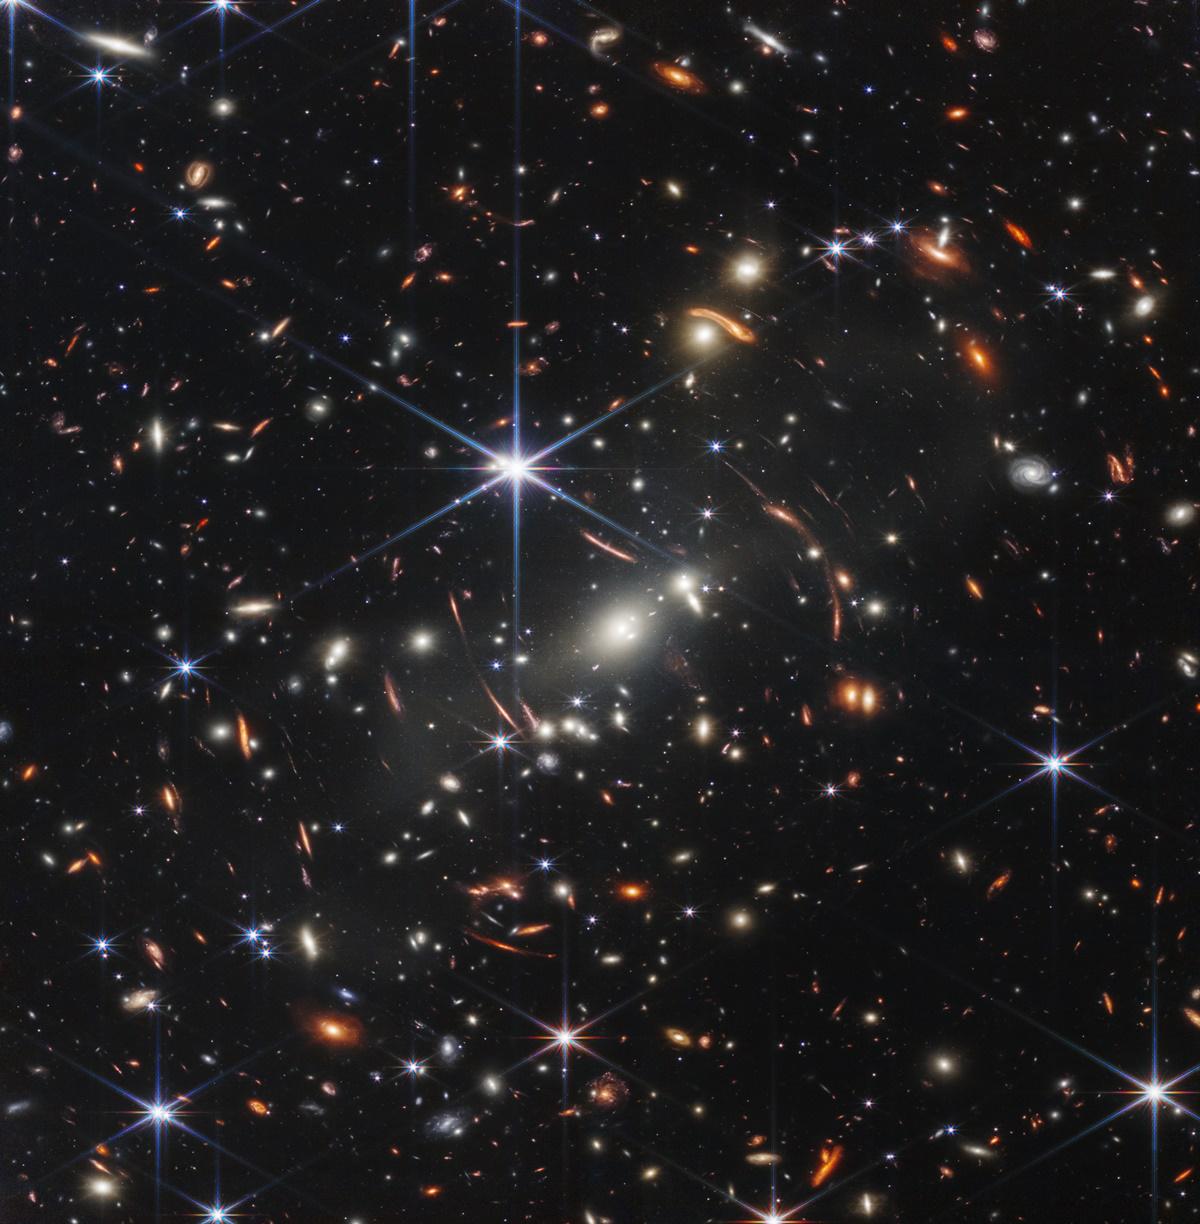 First scientific image from the James Webb Space Telescope shows the galaxy cluster SMACS 0723